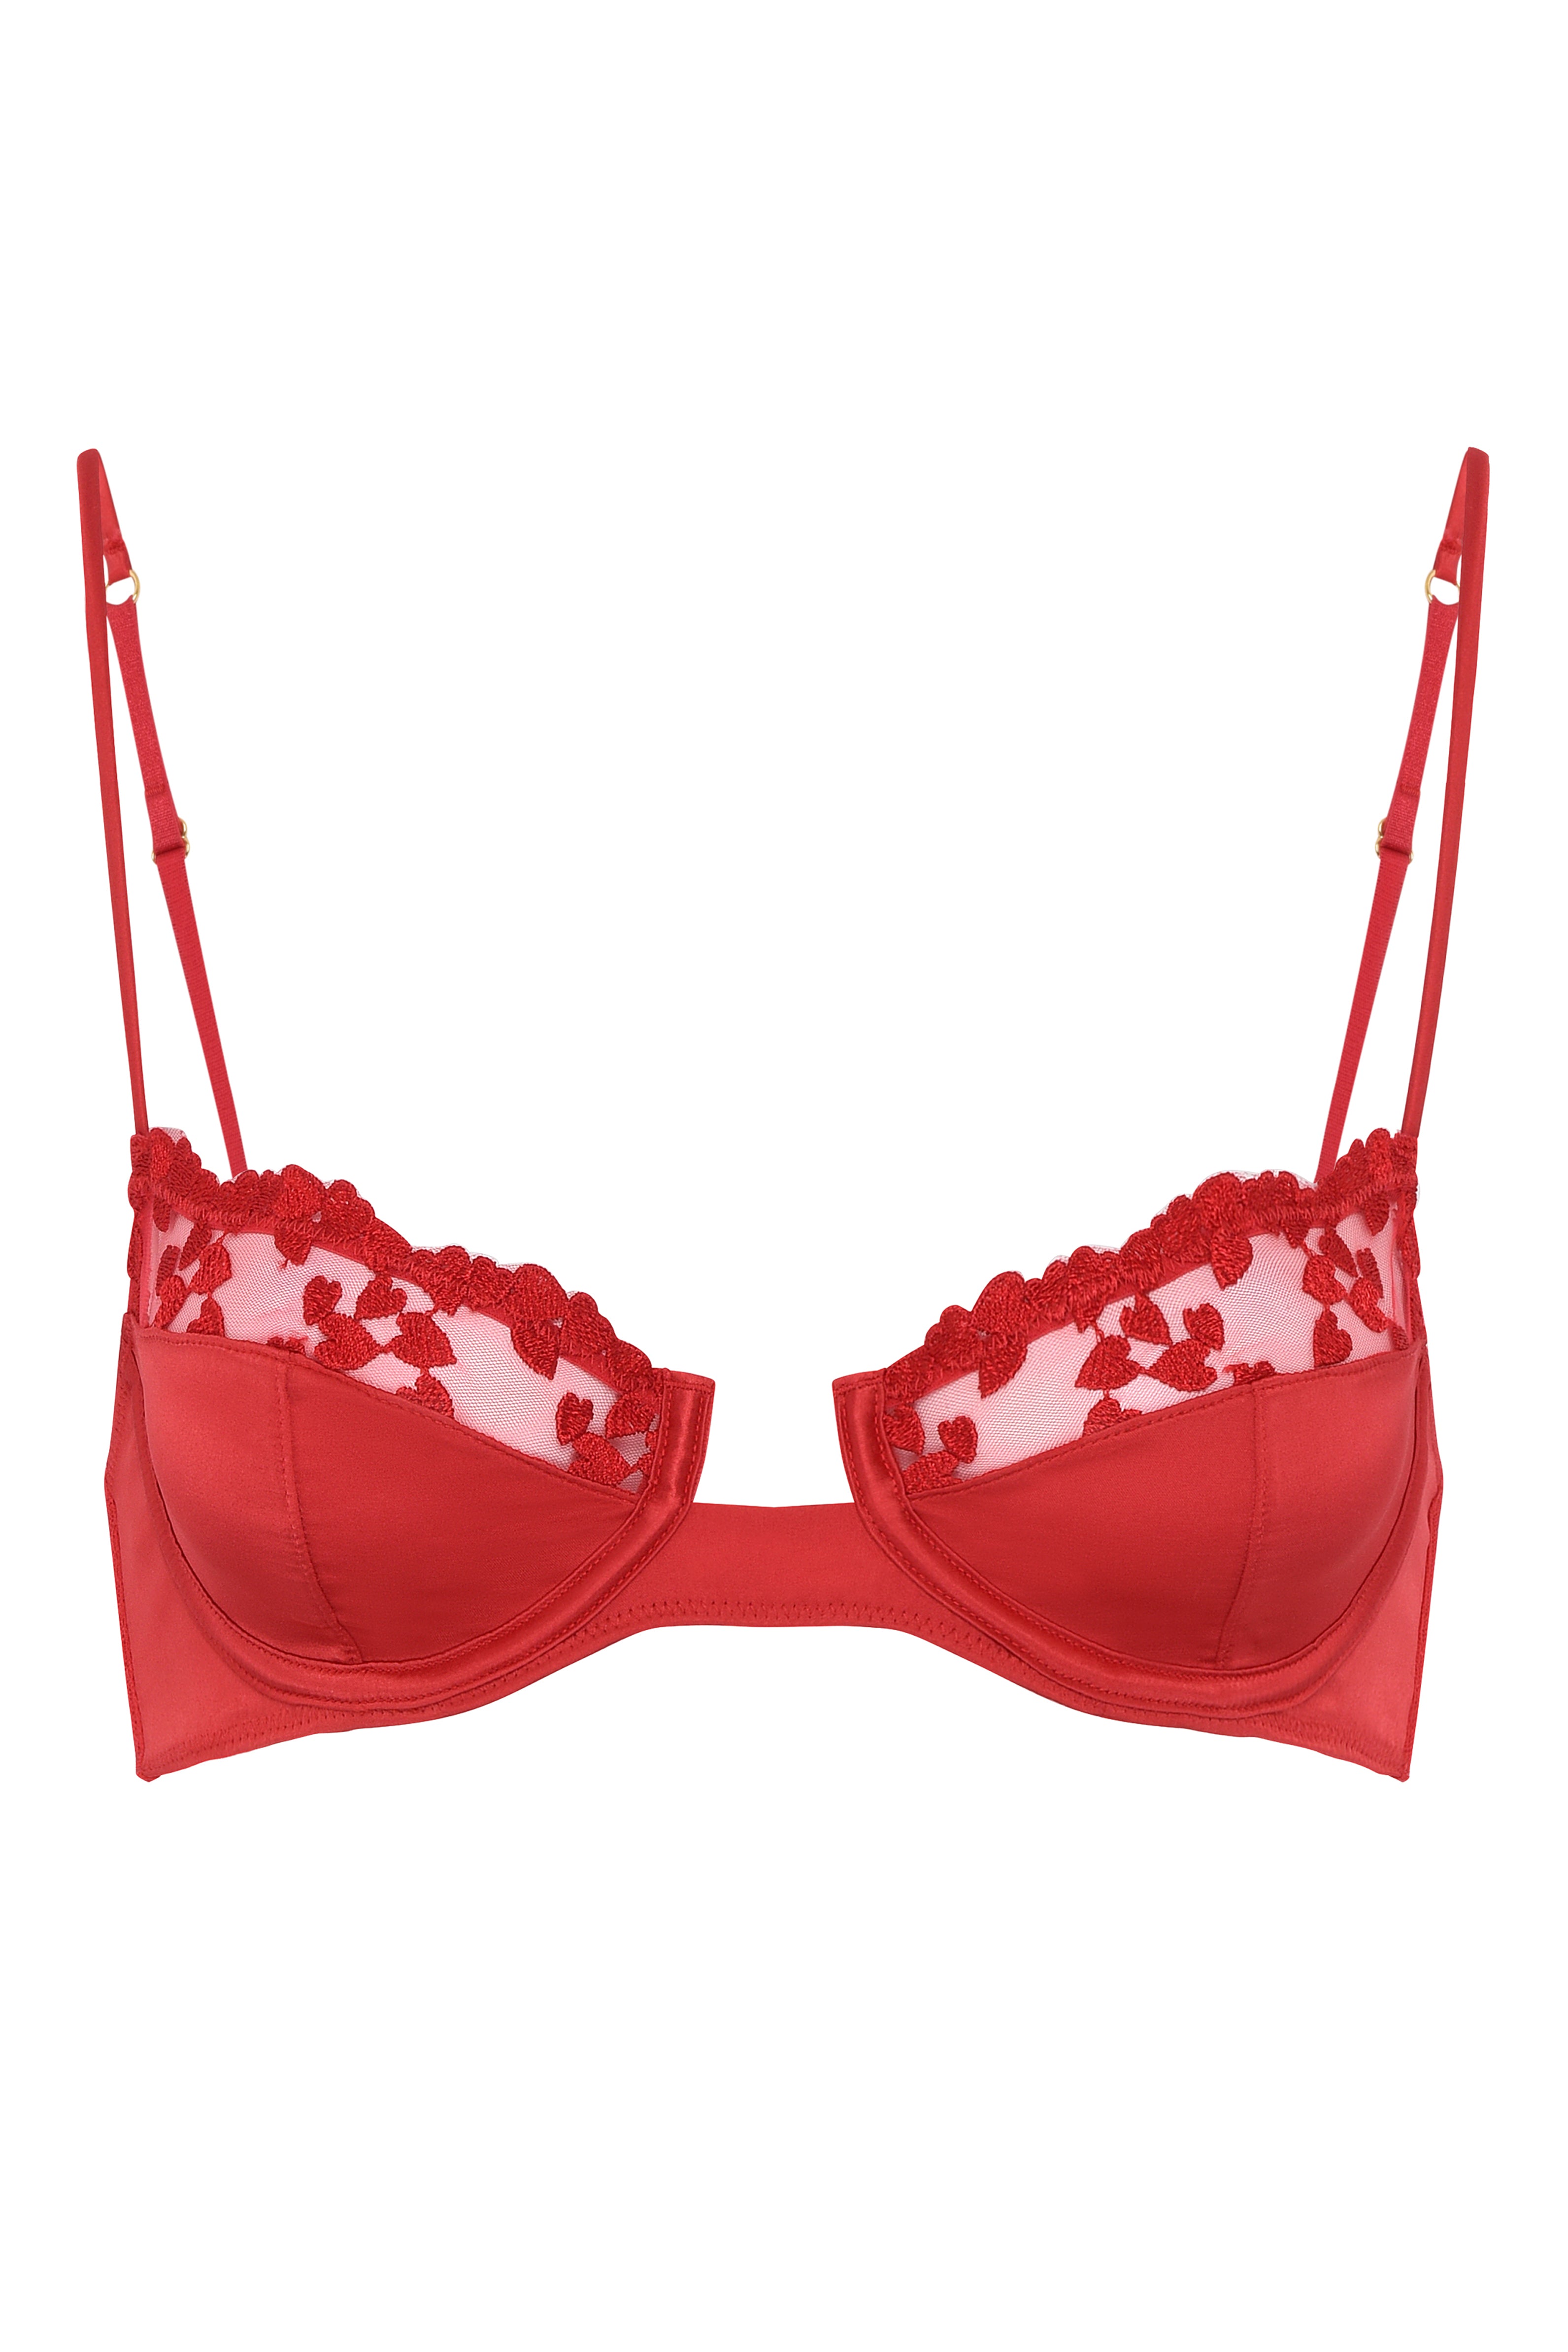 Buy Bralux Padded Cherry Bra with Detachable Strap and Trasperent Belt Free  with size B Cup;Fabric Lace Color White (Size-32B) Online at Low Prices in  India 